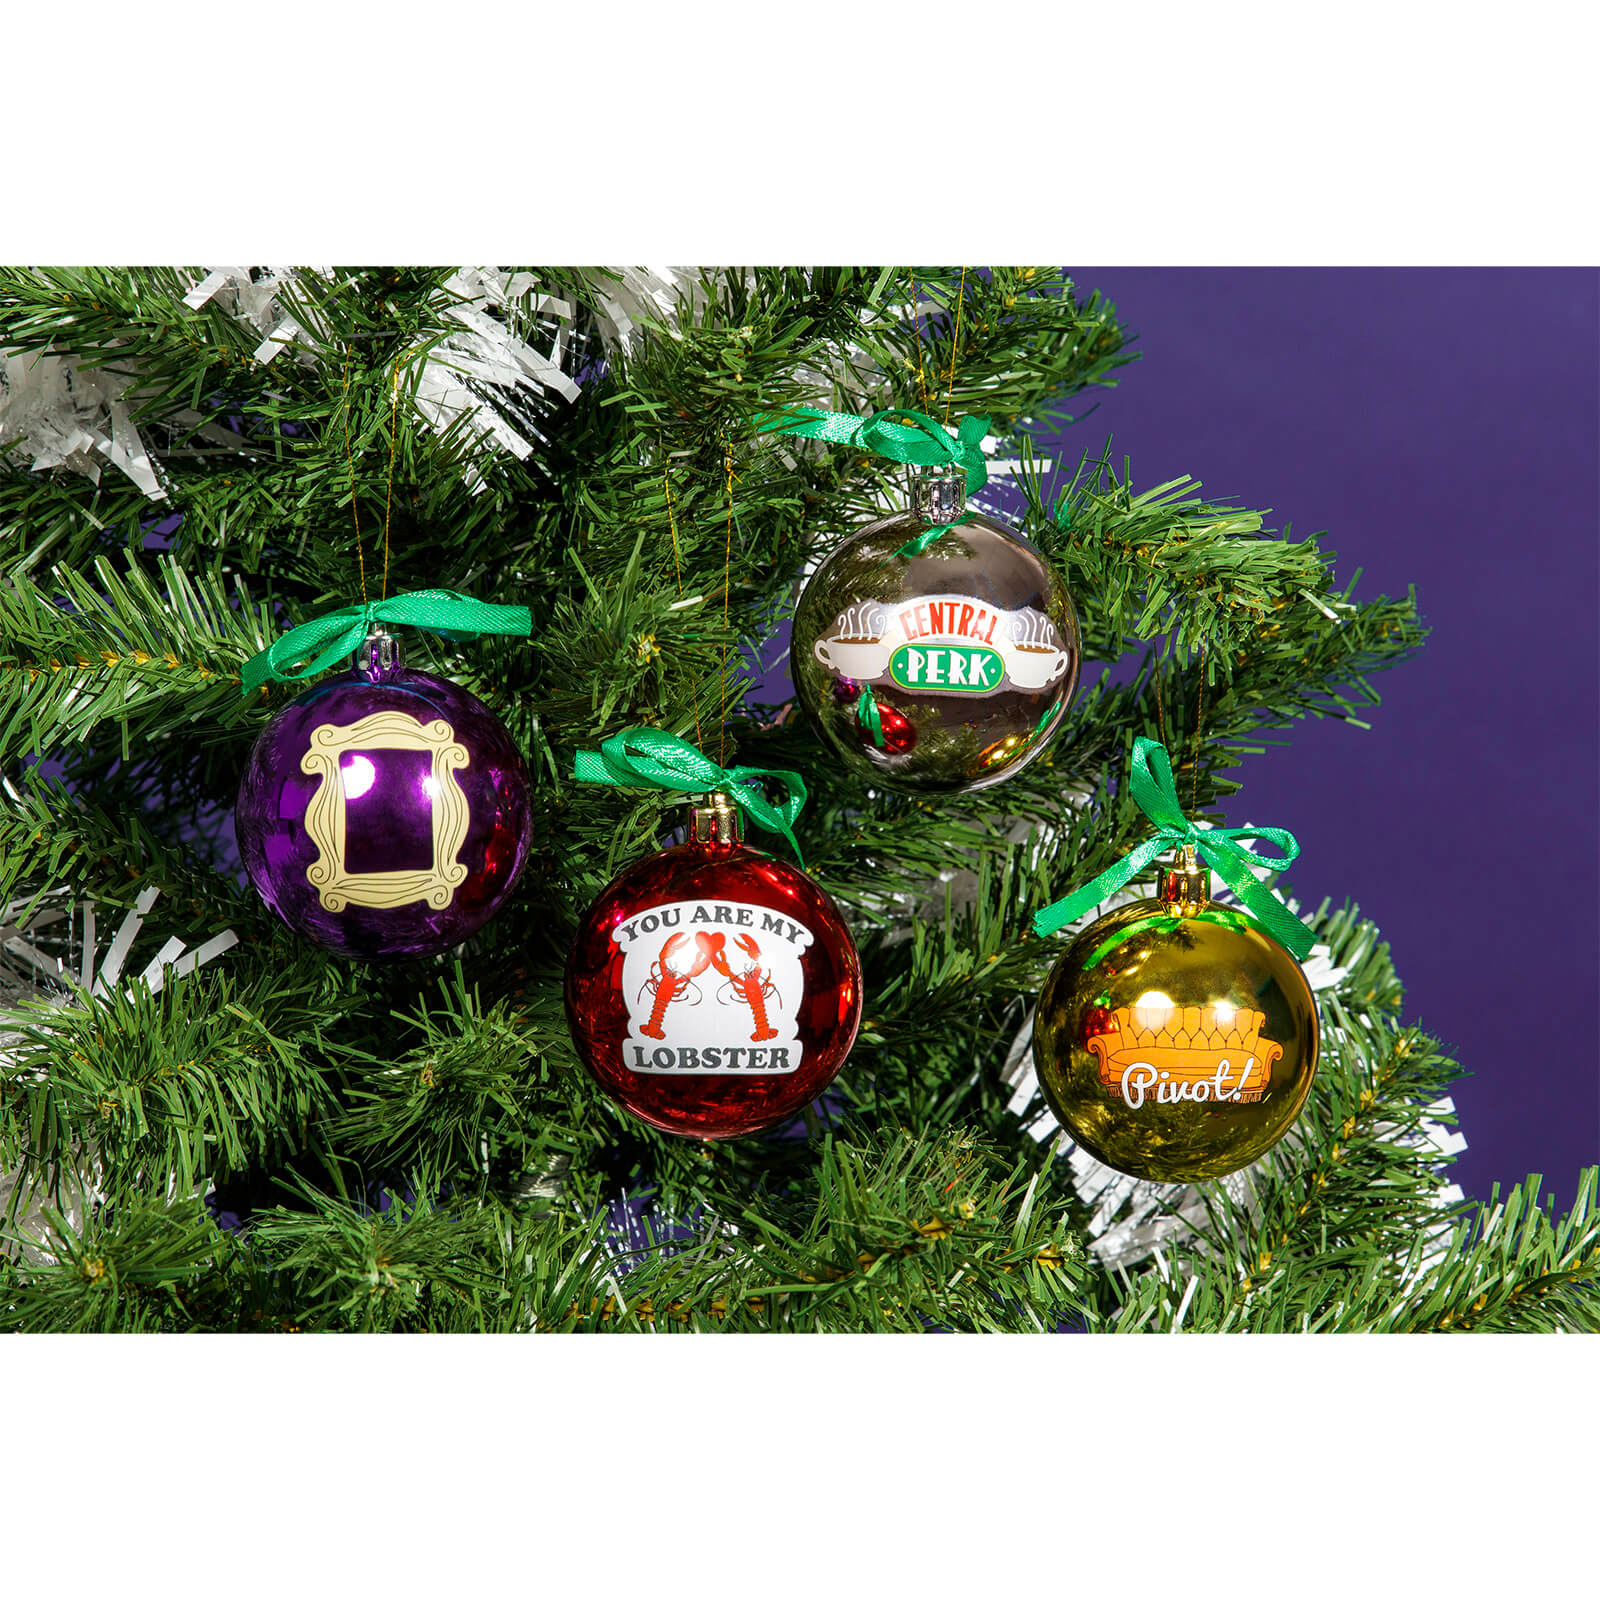 Friends Christmas Tree Decorations - Set of 4